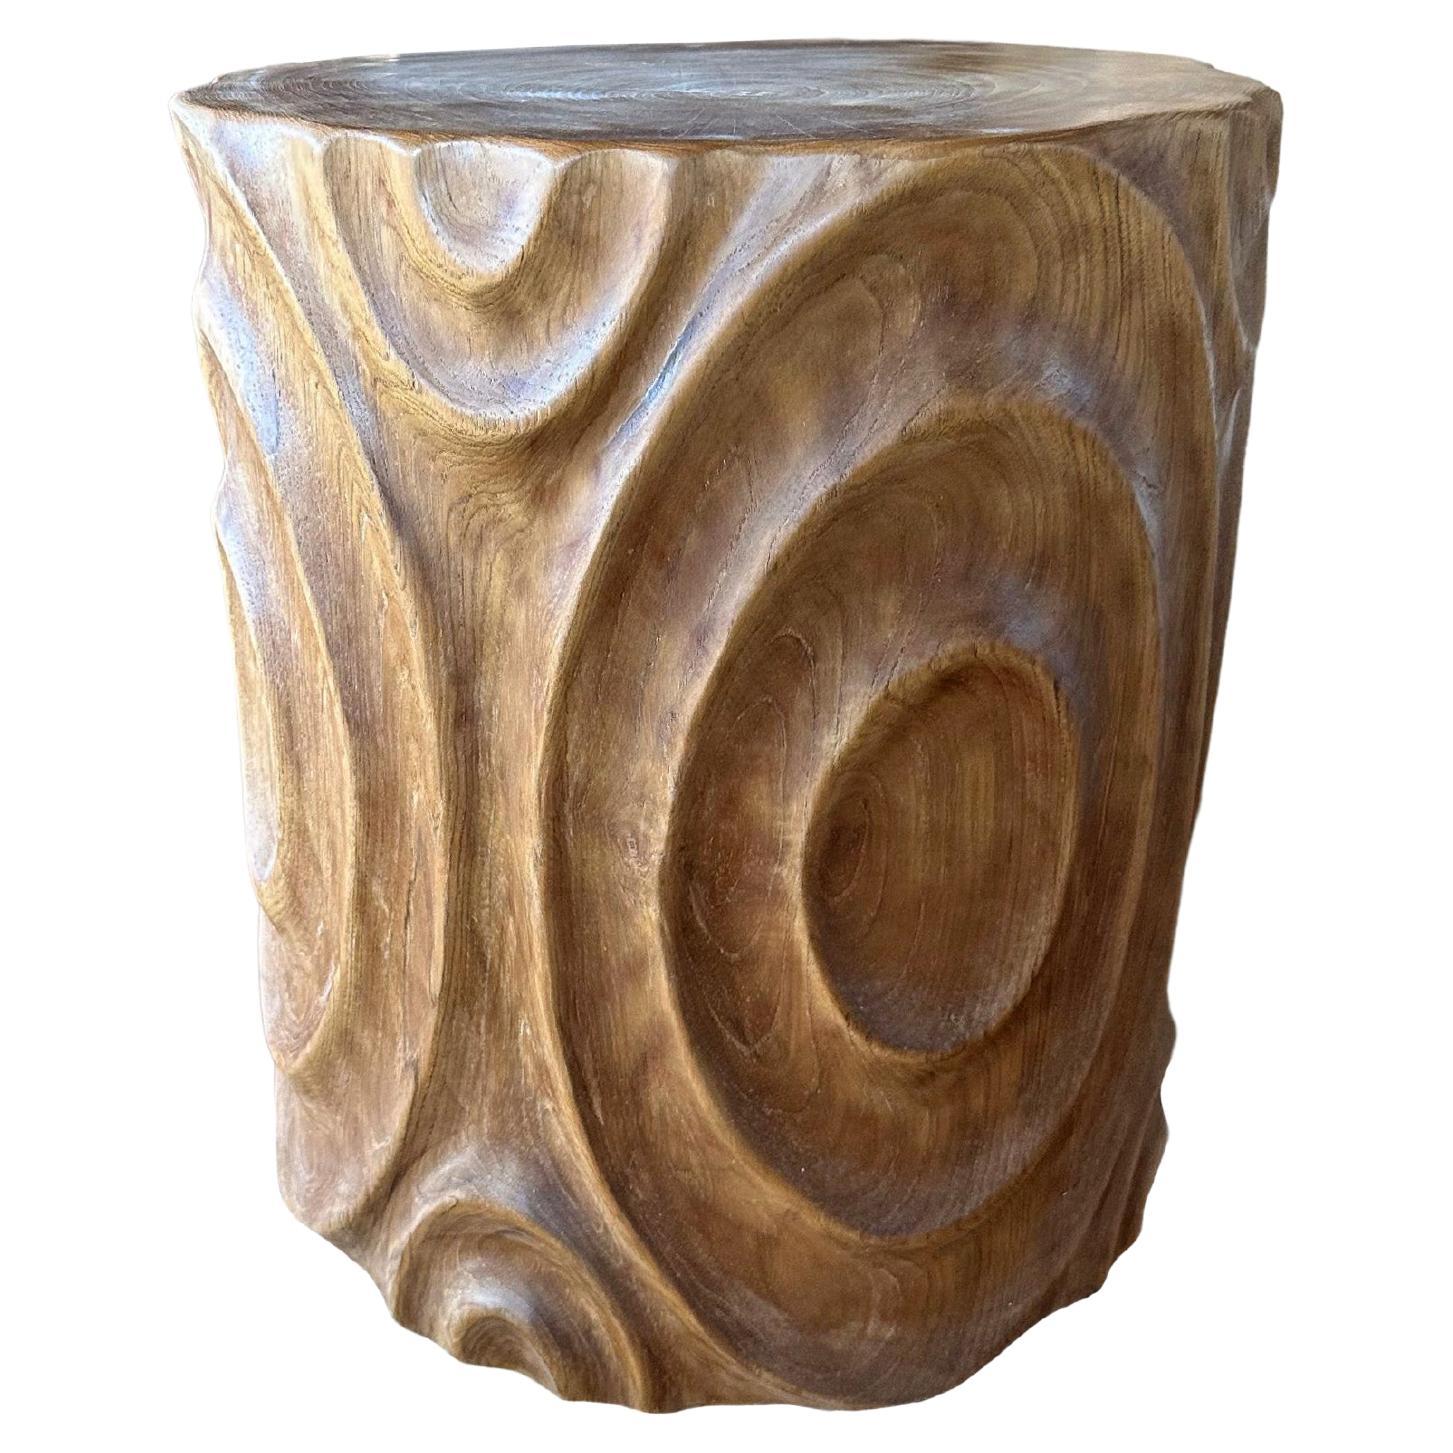 Solid Teak Wood Side Table with Stunning Textures, Modern Organic For Sale